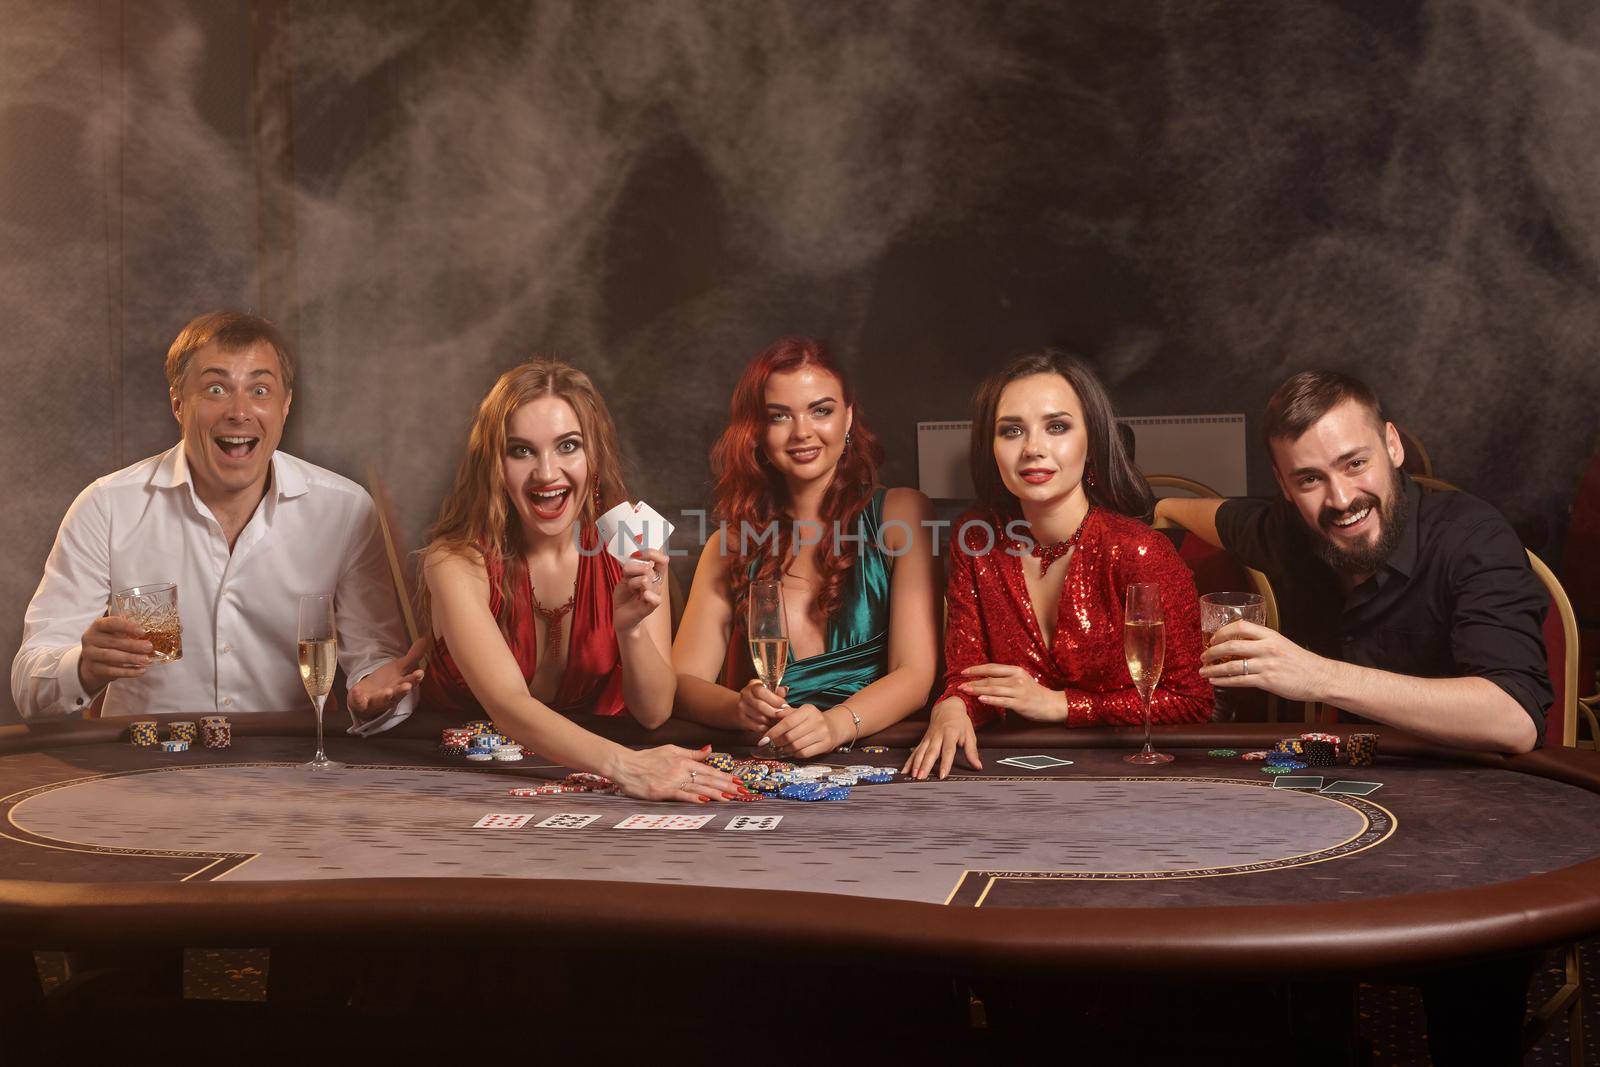 Cheerful buddies are playing poker at casino. They are celebrating their win, smiling and looking vey excited while posing at the table against a dark smoke background. Cards, chips, money, alcohol, gambling, entertainment concept.